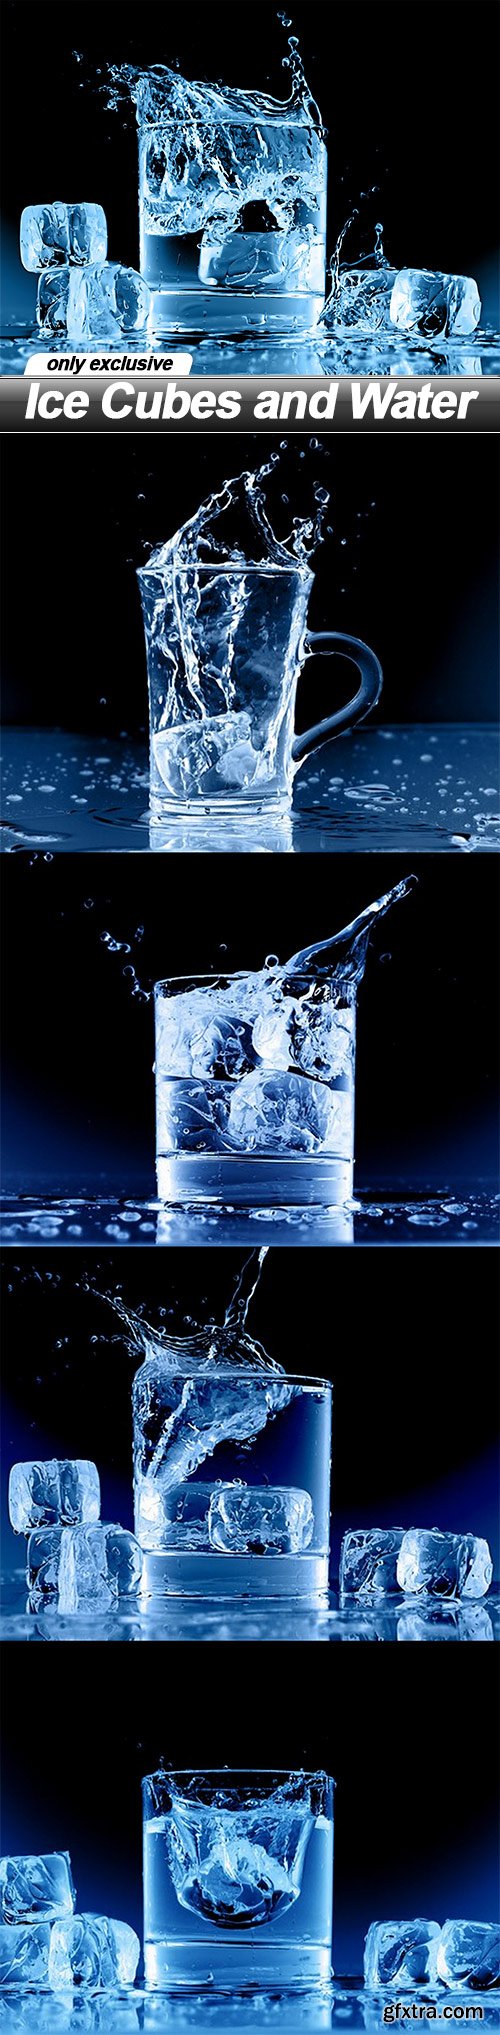 Ice Cubes and Water - 5 UHQ JPEG